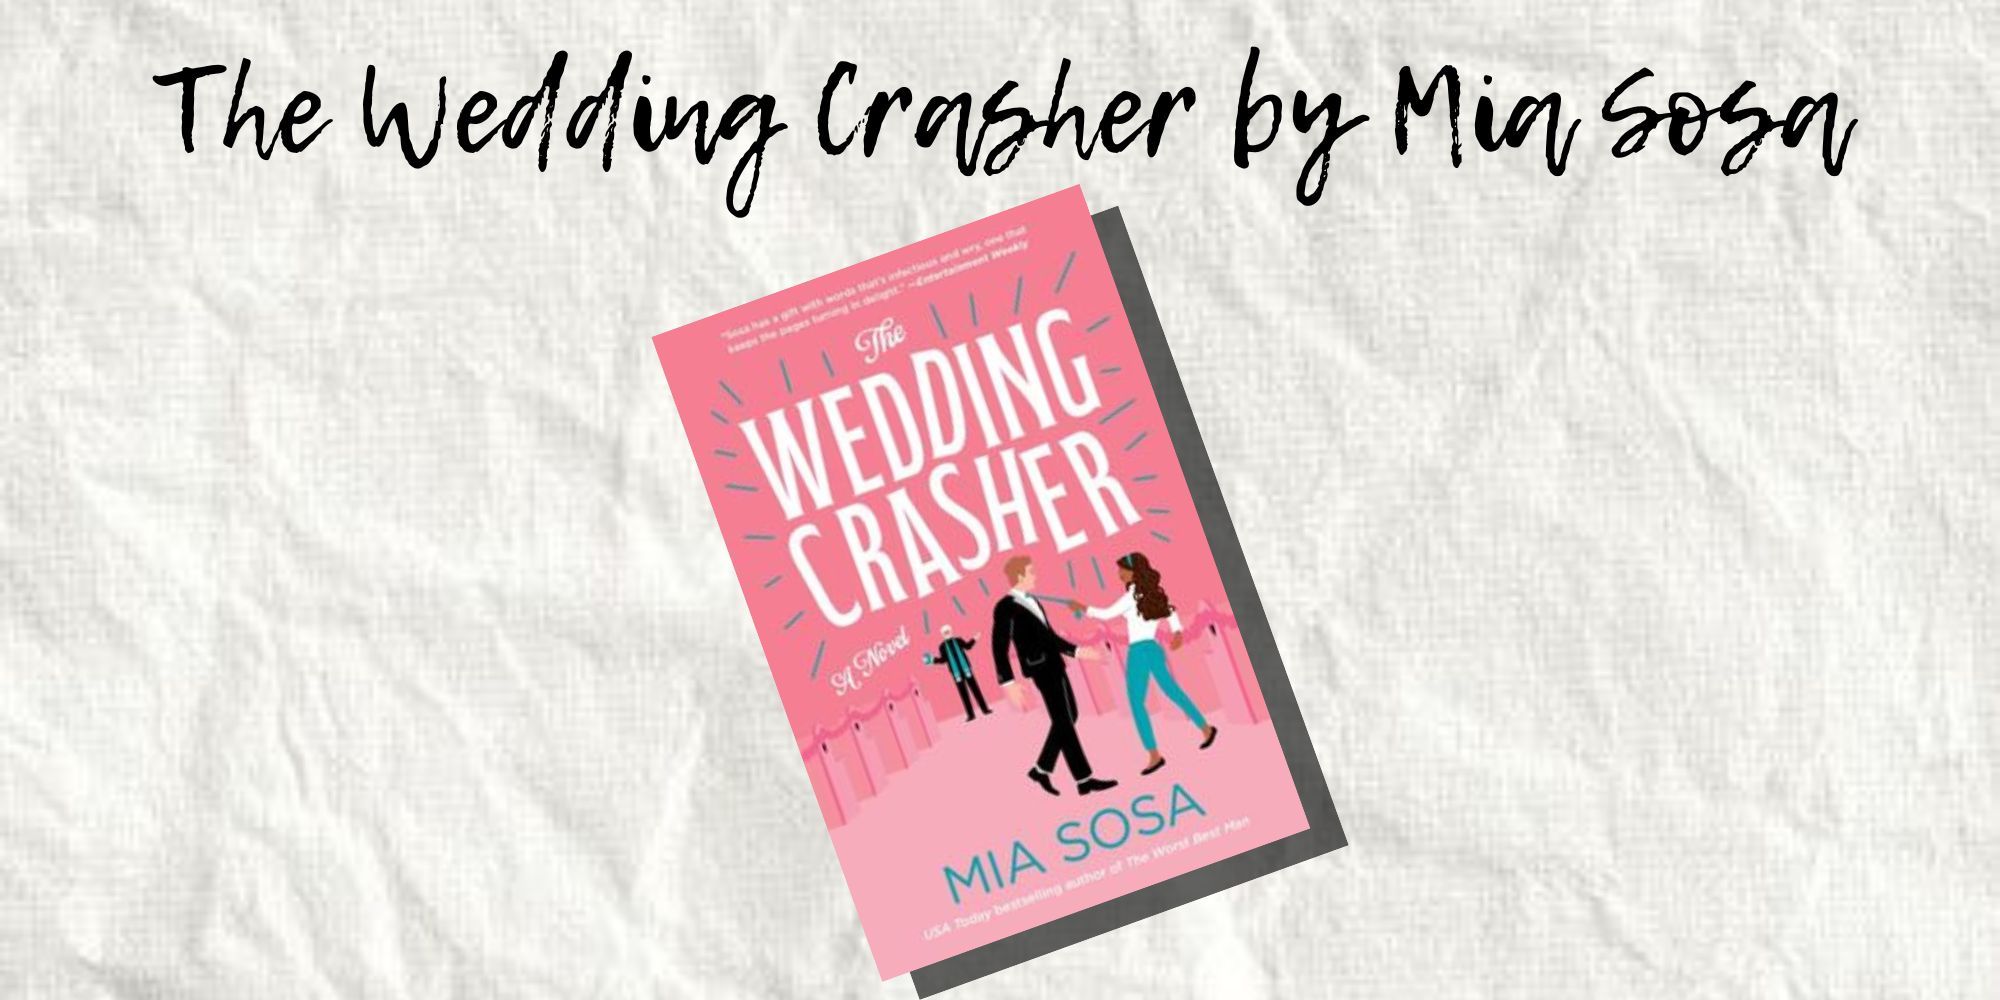 The Cover of The Wedding Crasher by Mia Sosa